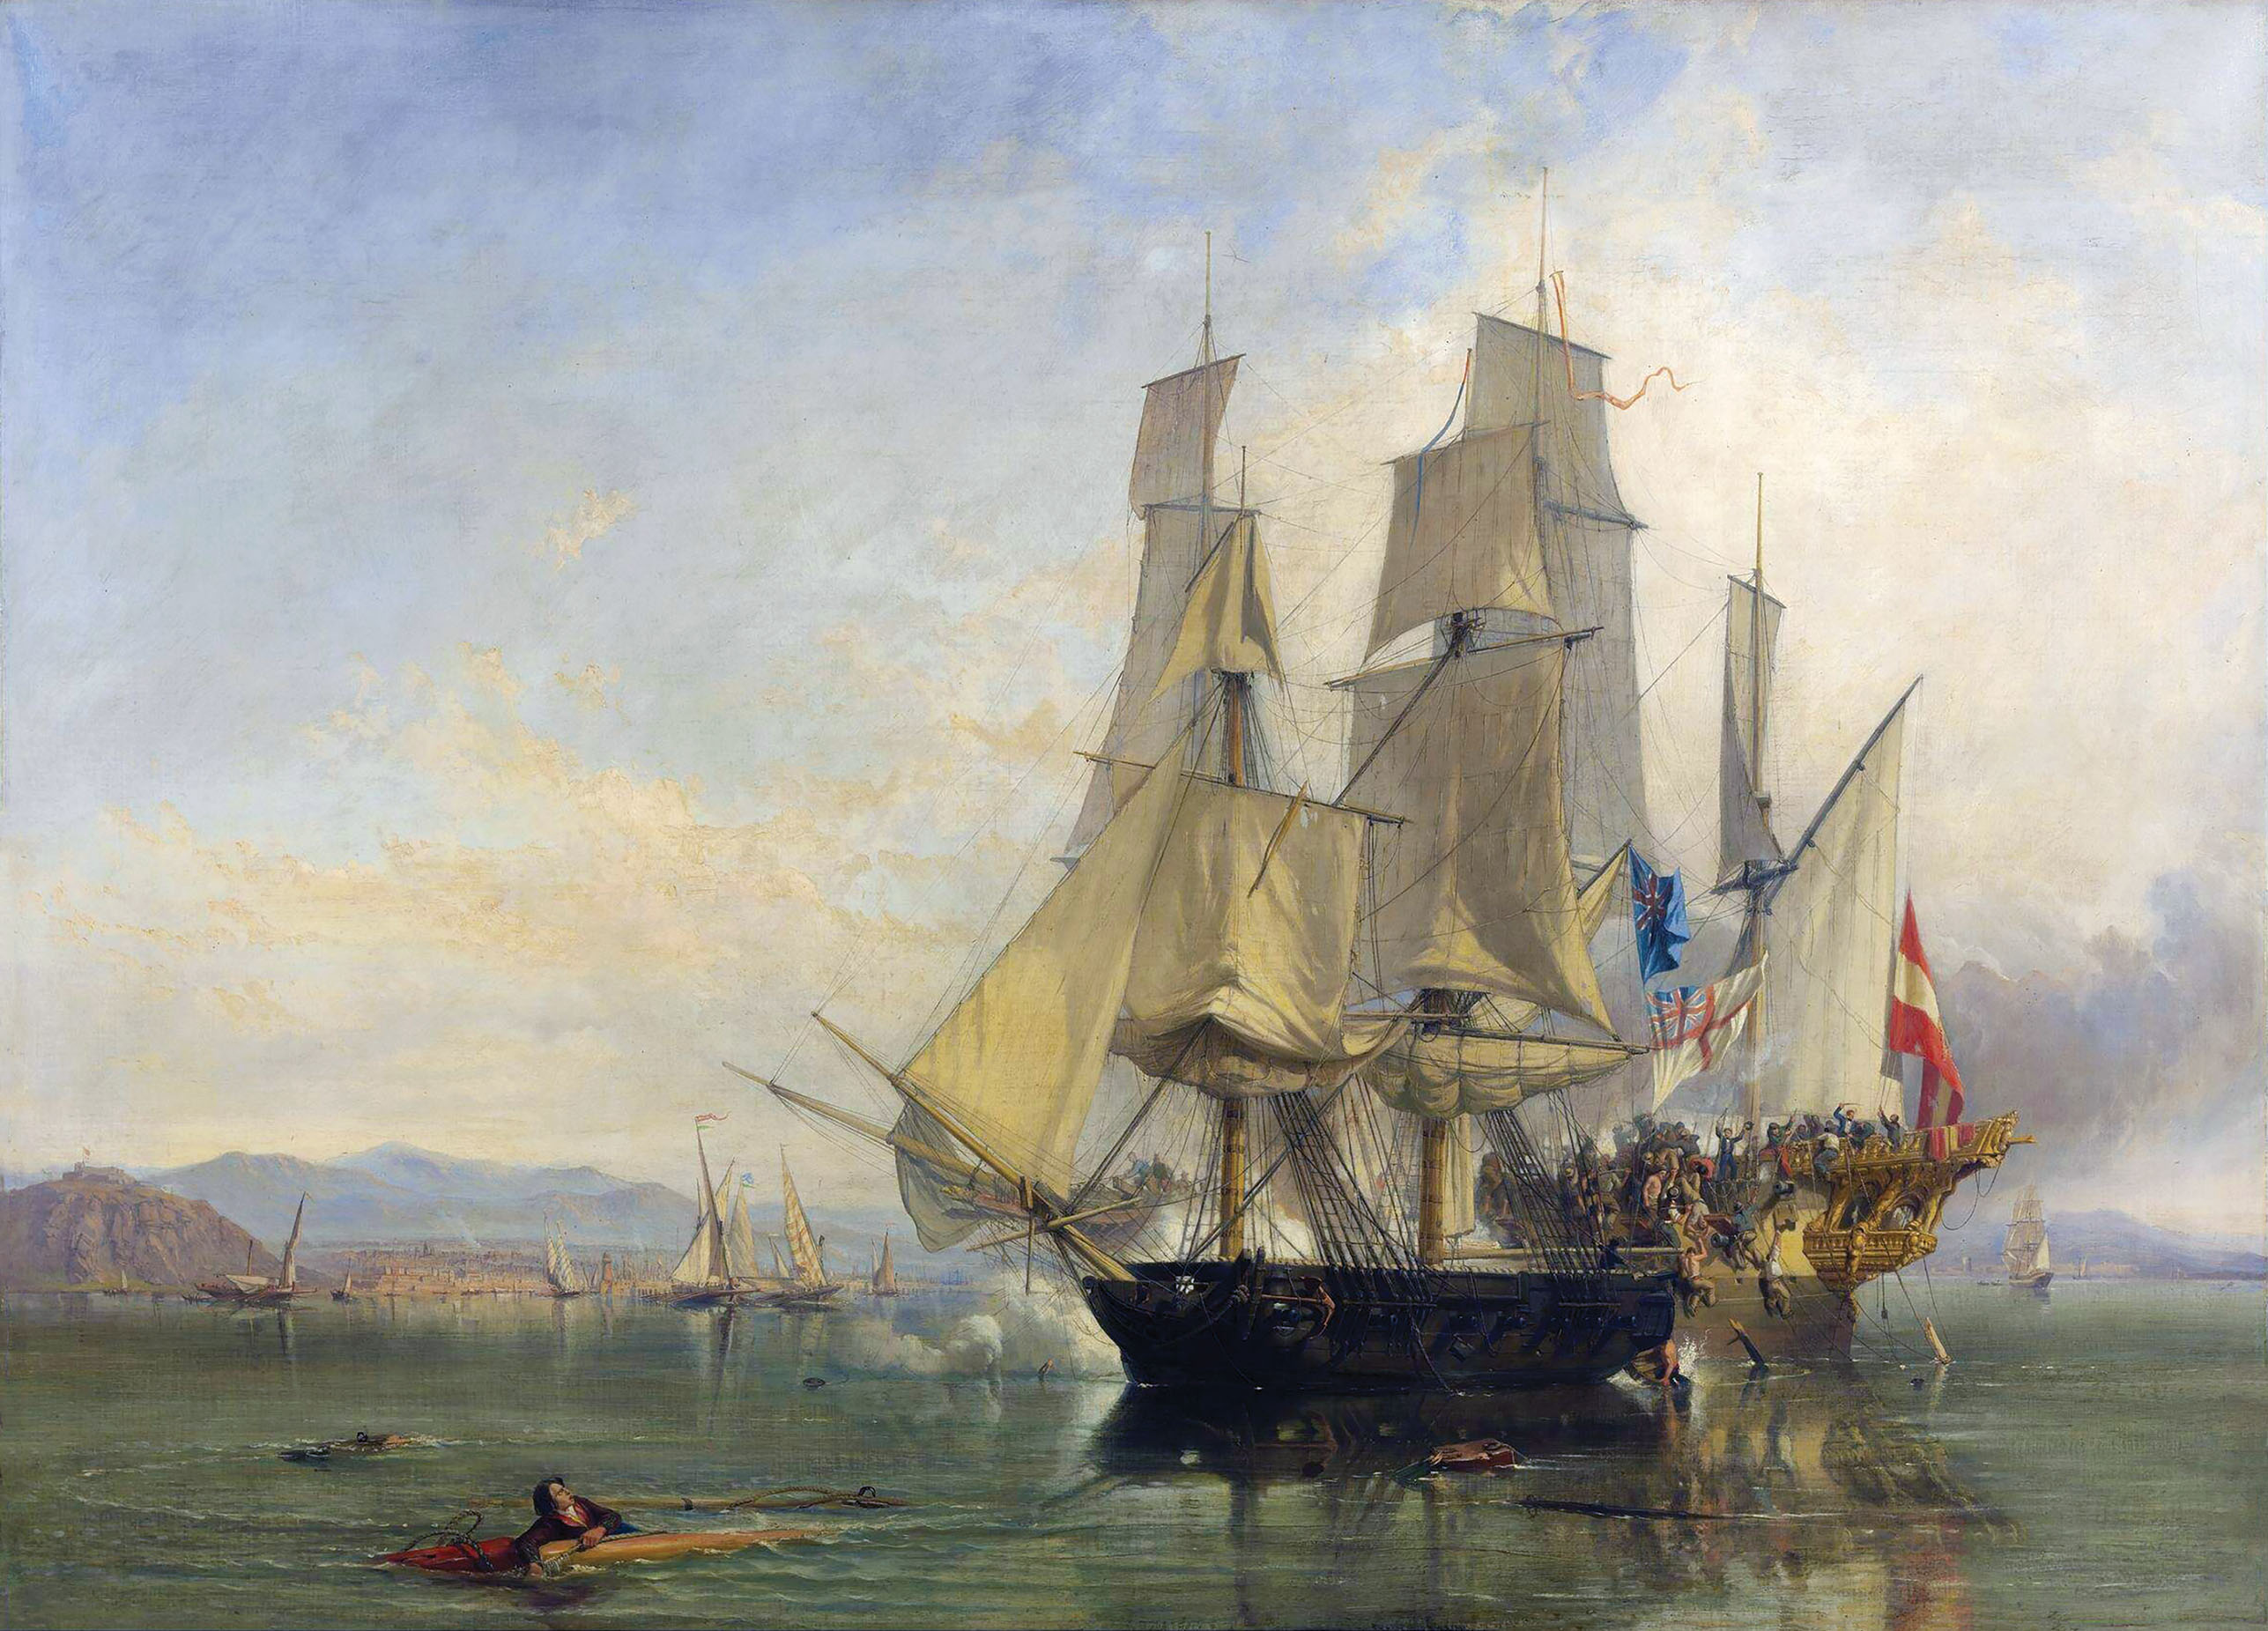 The 1801 capture of the Spanish frigate El Gamo by Cochrane’s HMS Speedy—depicted here in an 1845 oil by British maritime painter Clarkson Stanfield—was among the Sea Wolf’s celebrated victories. / Victoria and Albert Museum, London